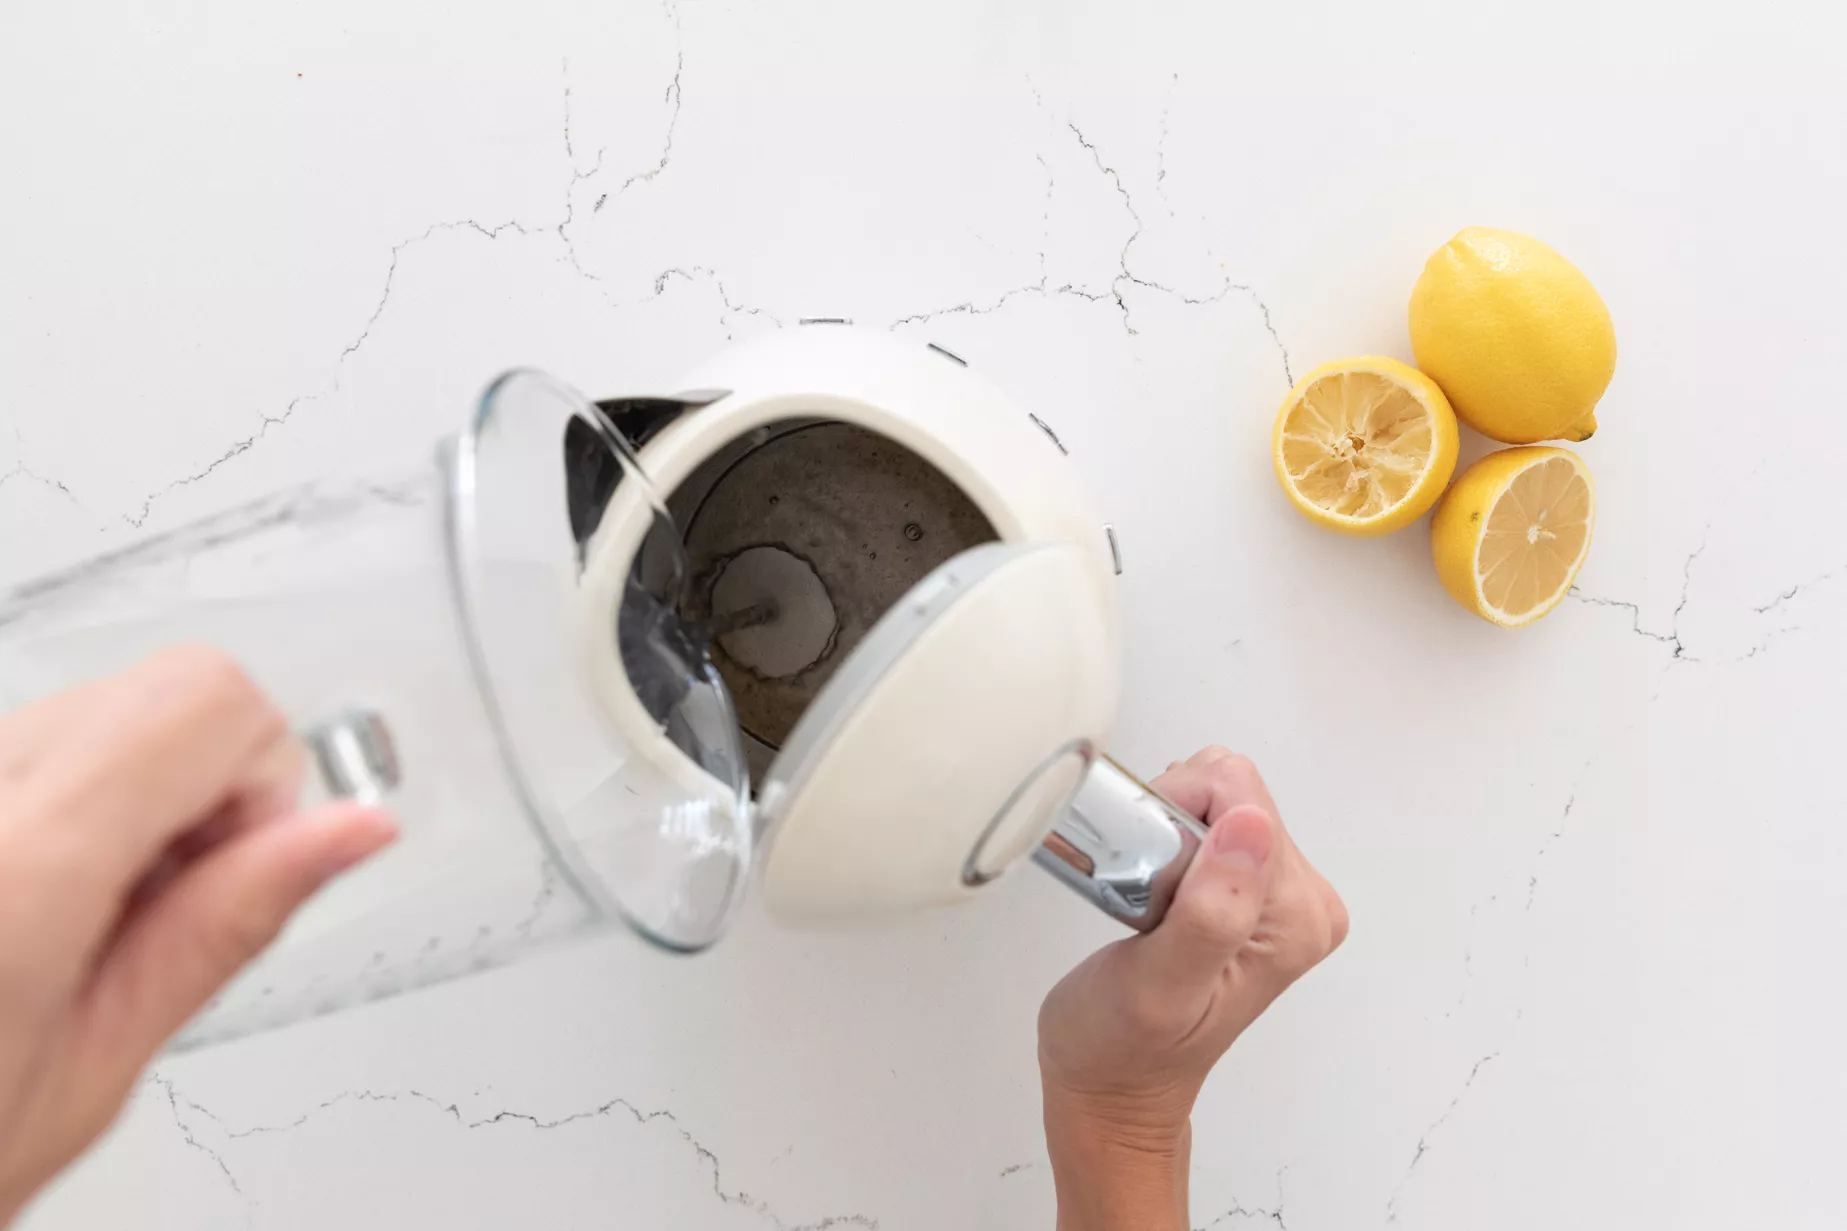 How to clean an electric kettle using lemon juice?